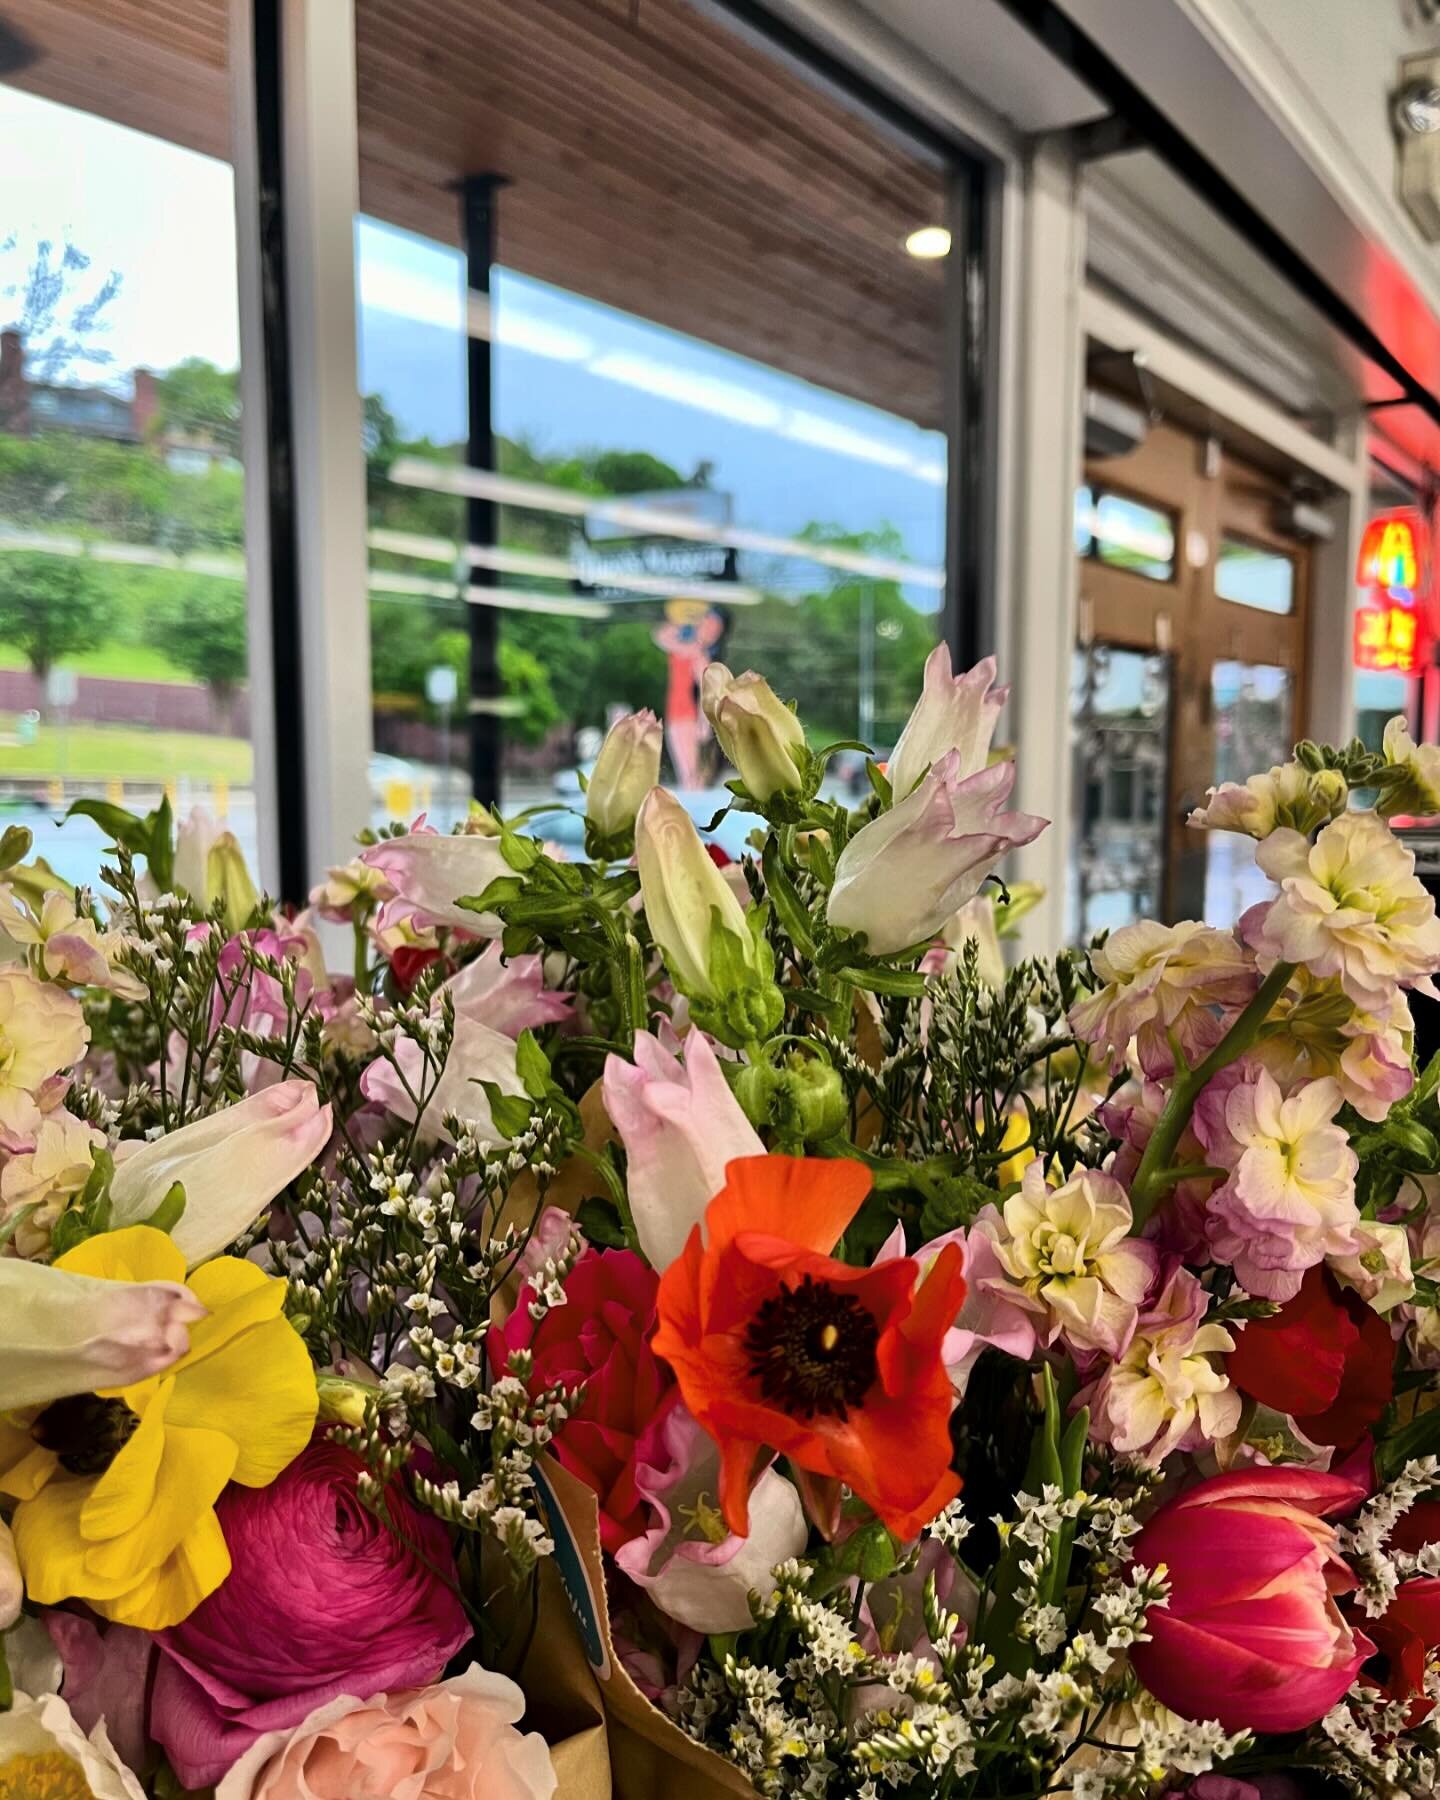 April showers bring May flowers ☔️ 💐unless you&rsquo;re in Texas, and then pretty much anything goes 🙃 @goodjuju_austinflowerfarm knocked it out of the park with these beauties! Pick yours up today!